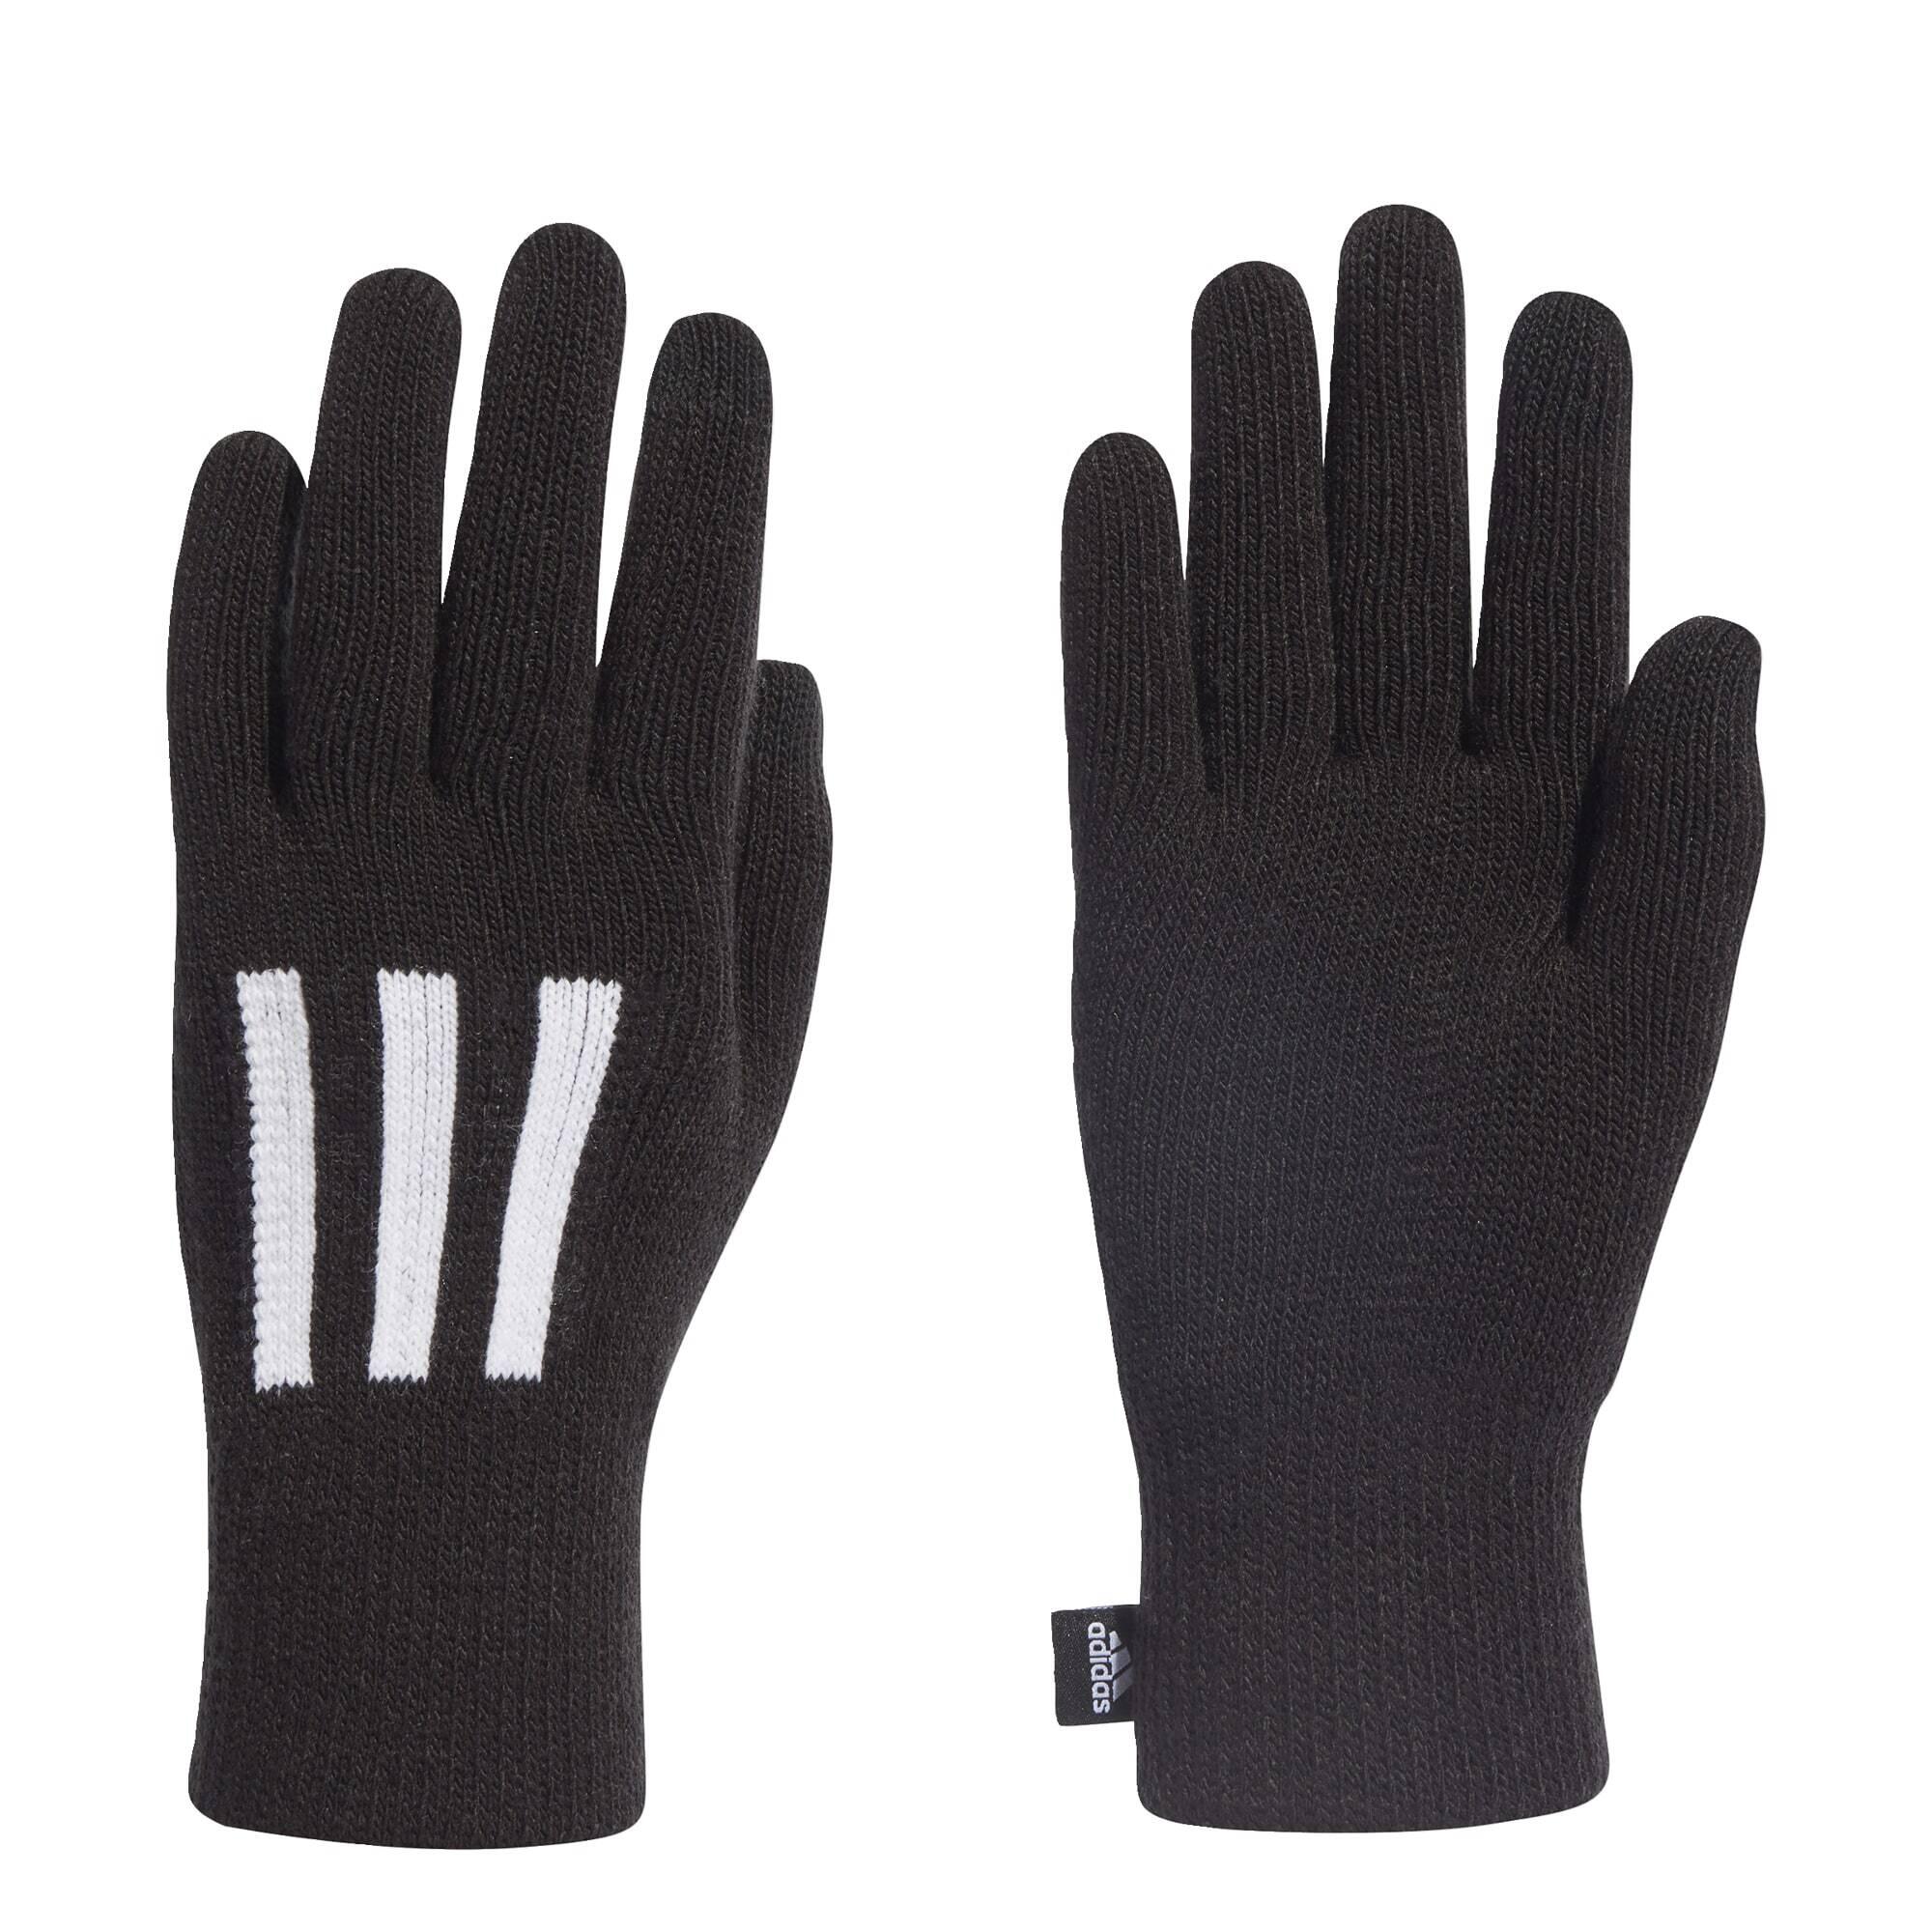 3-Stripes Conductive Gloves 1/5